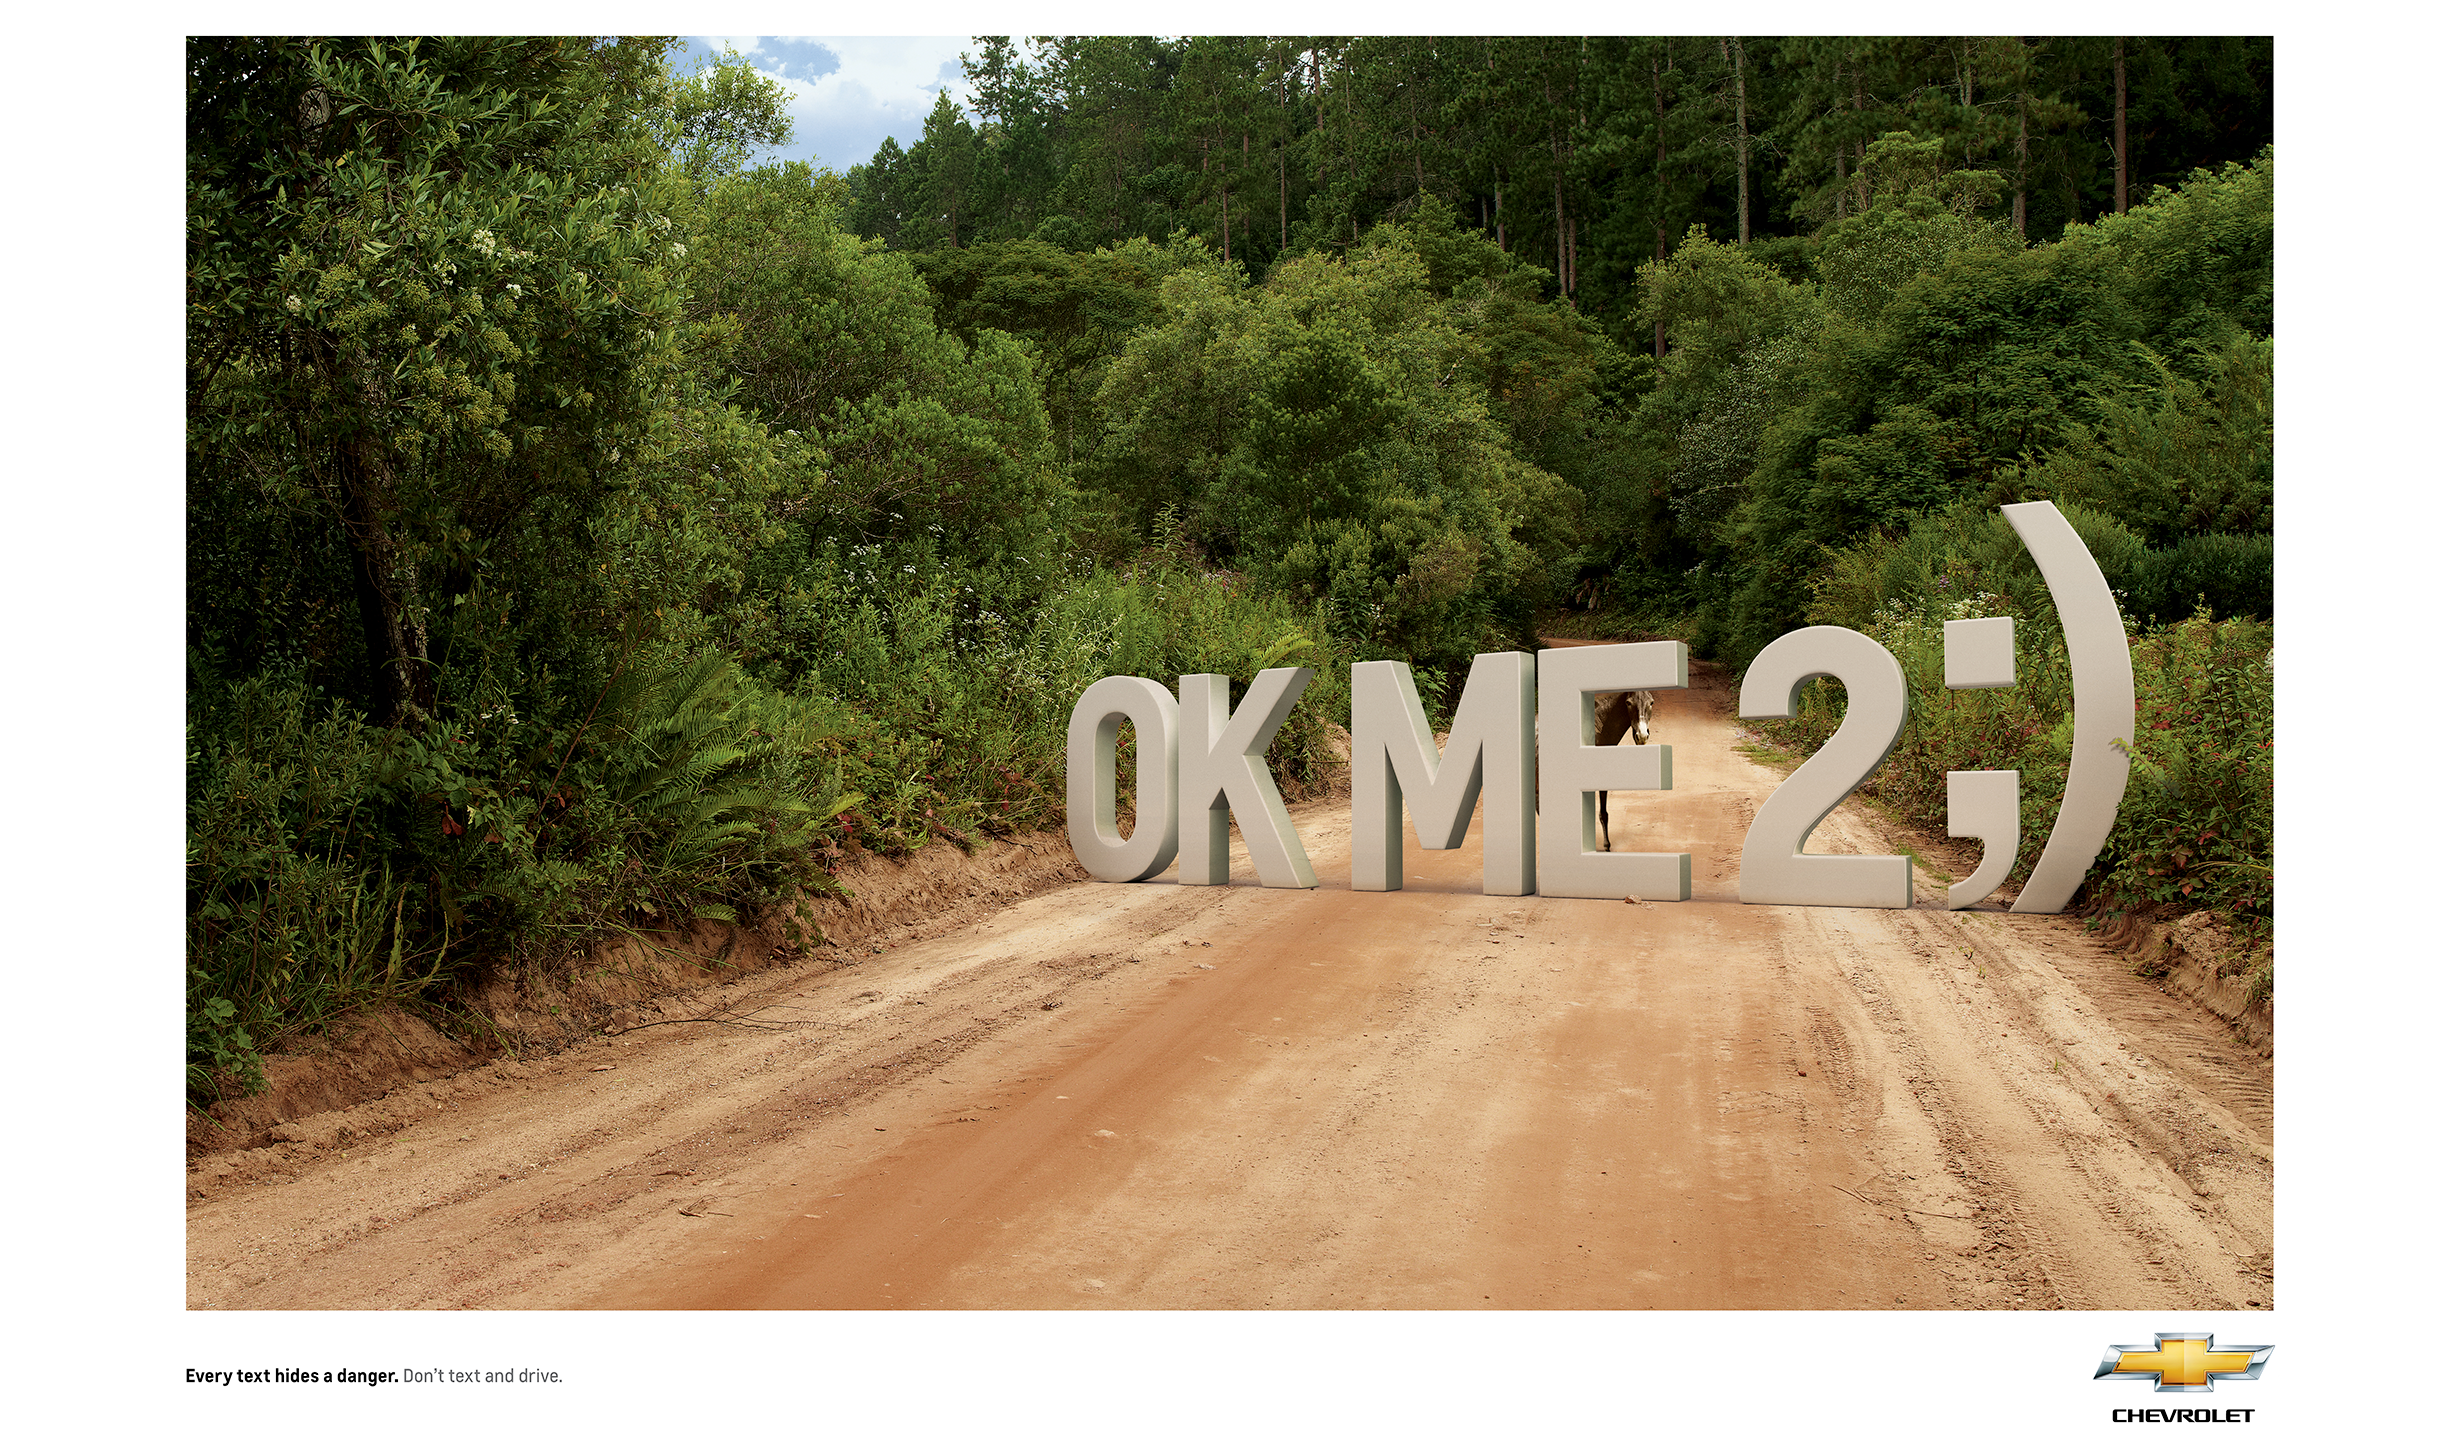 An empty offroad road with a dunkey on the way. In front of the dunkey there are big letters saying 'Ok me 2 ;)' hidding him. The text says 'Every text hides a danger. Don't text and drive'